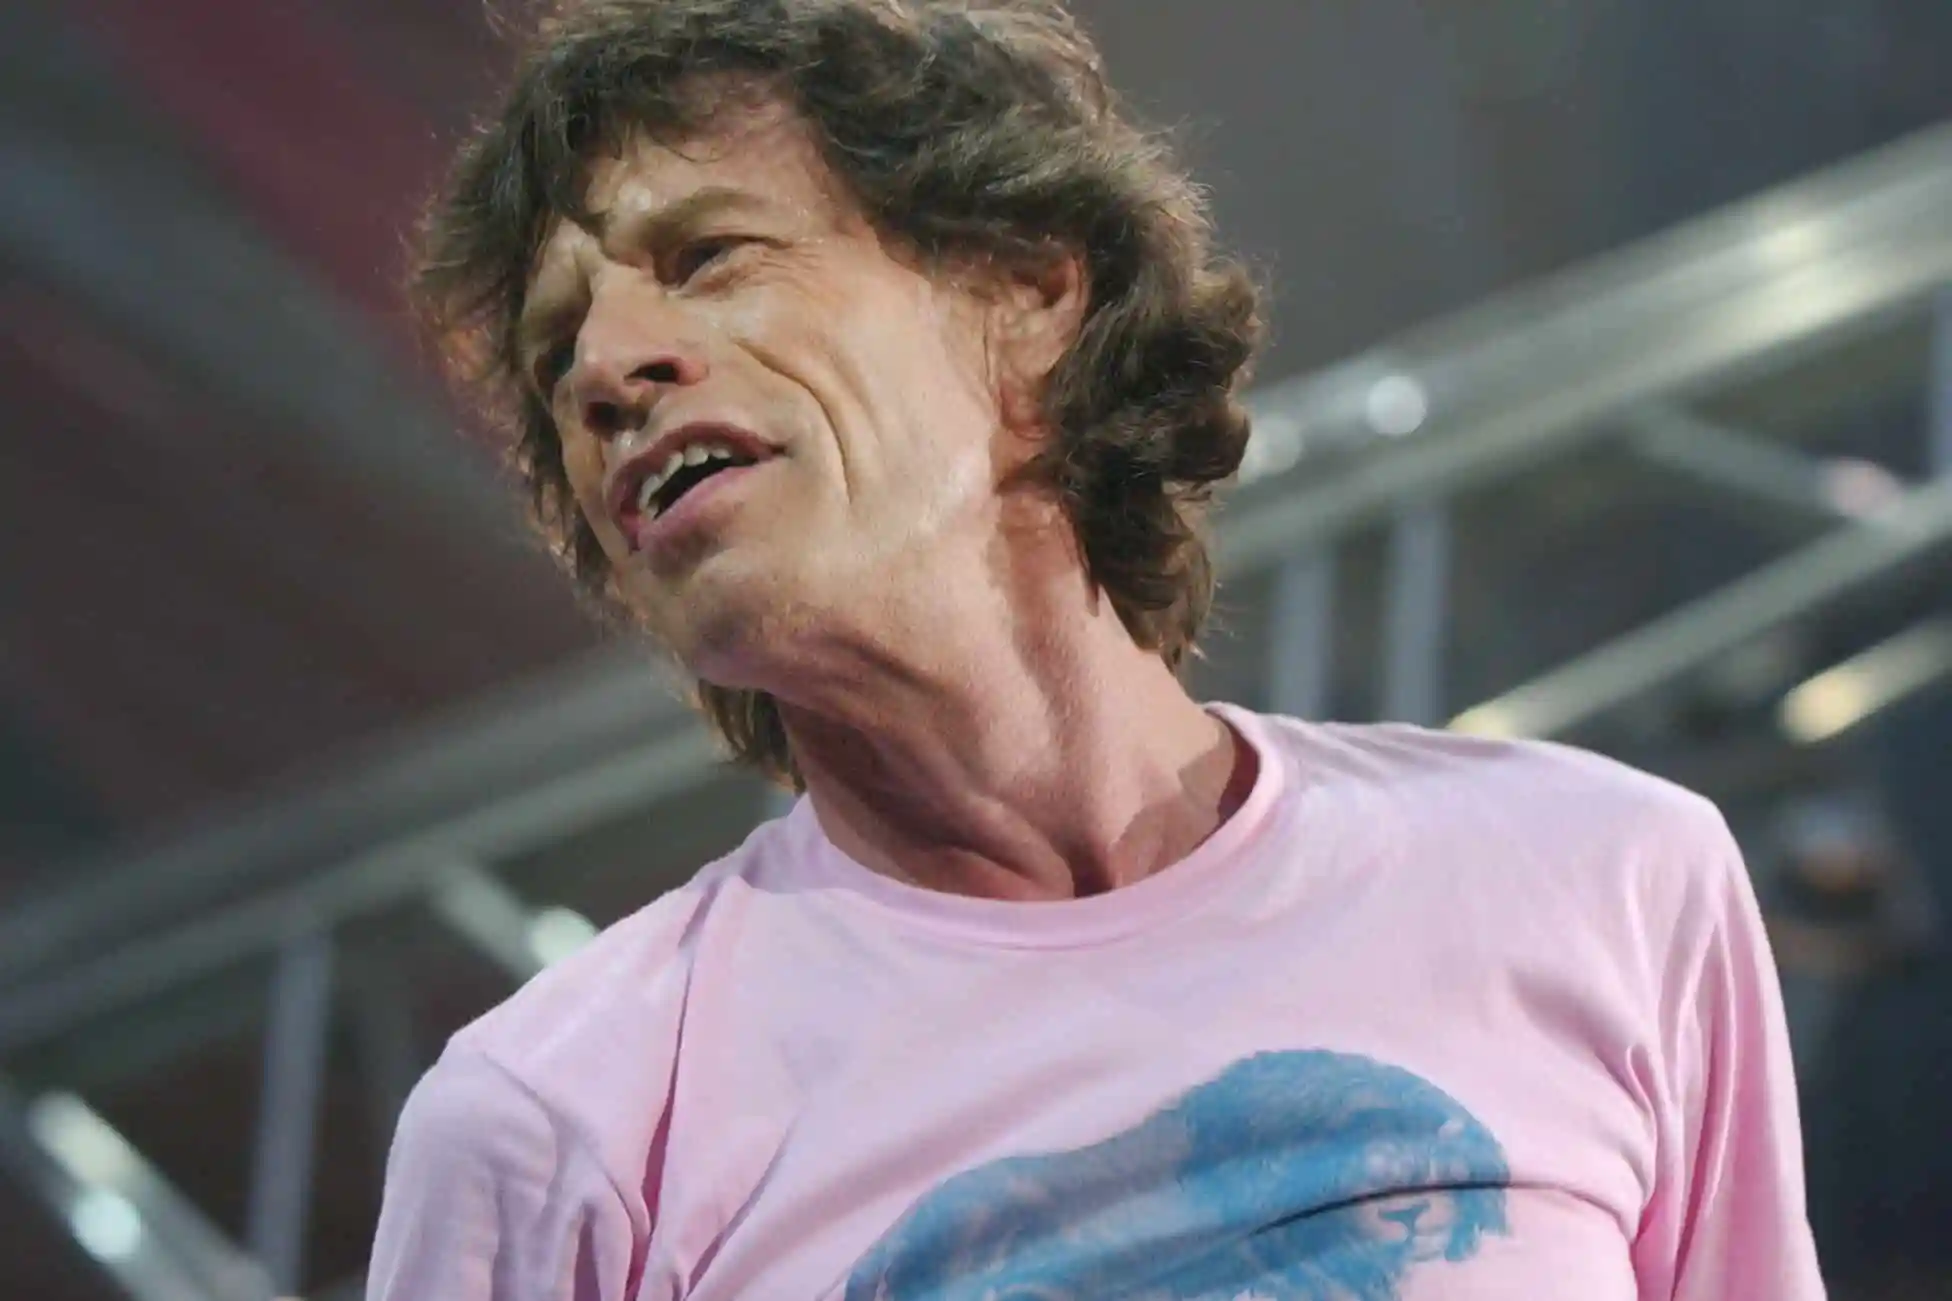 Mick Jagger Weighs In On New Rolling Stones Album